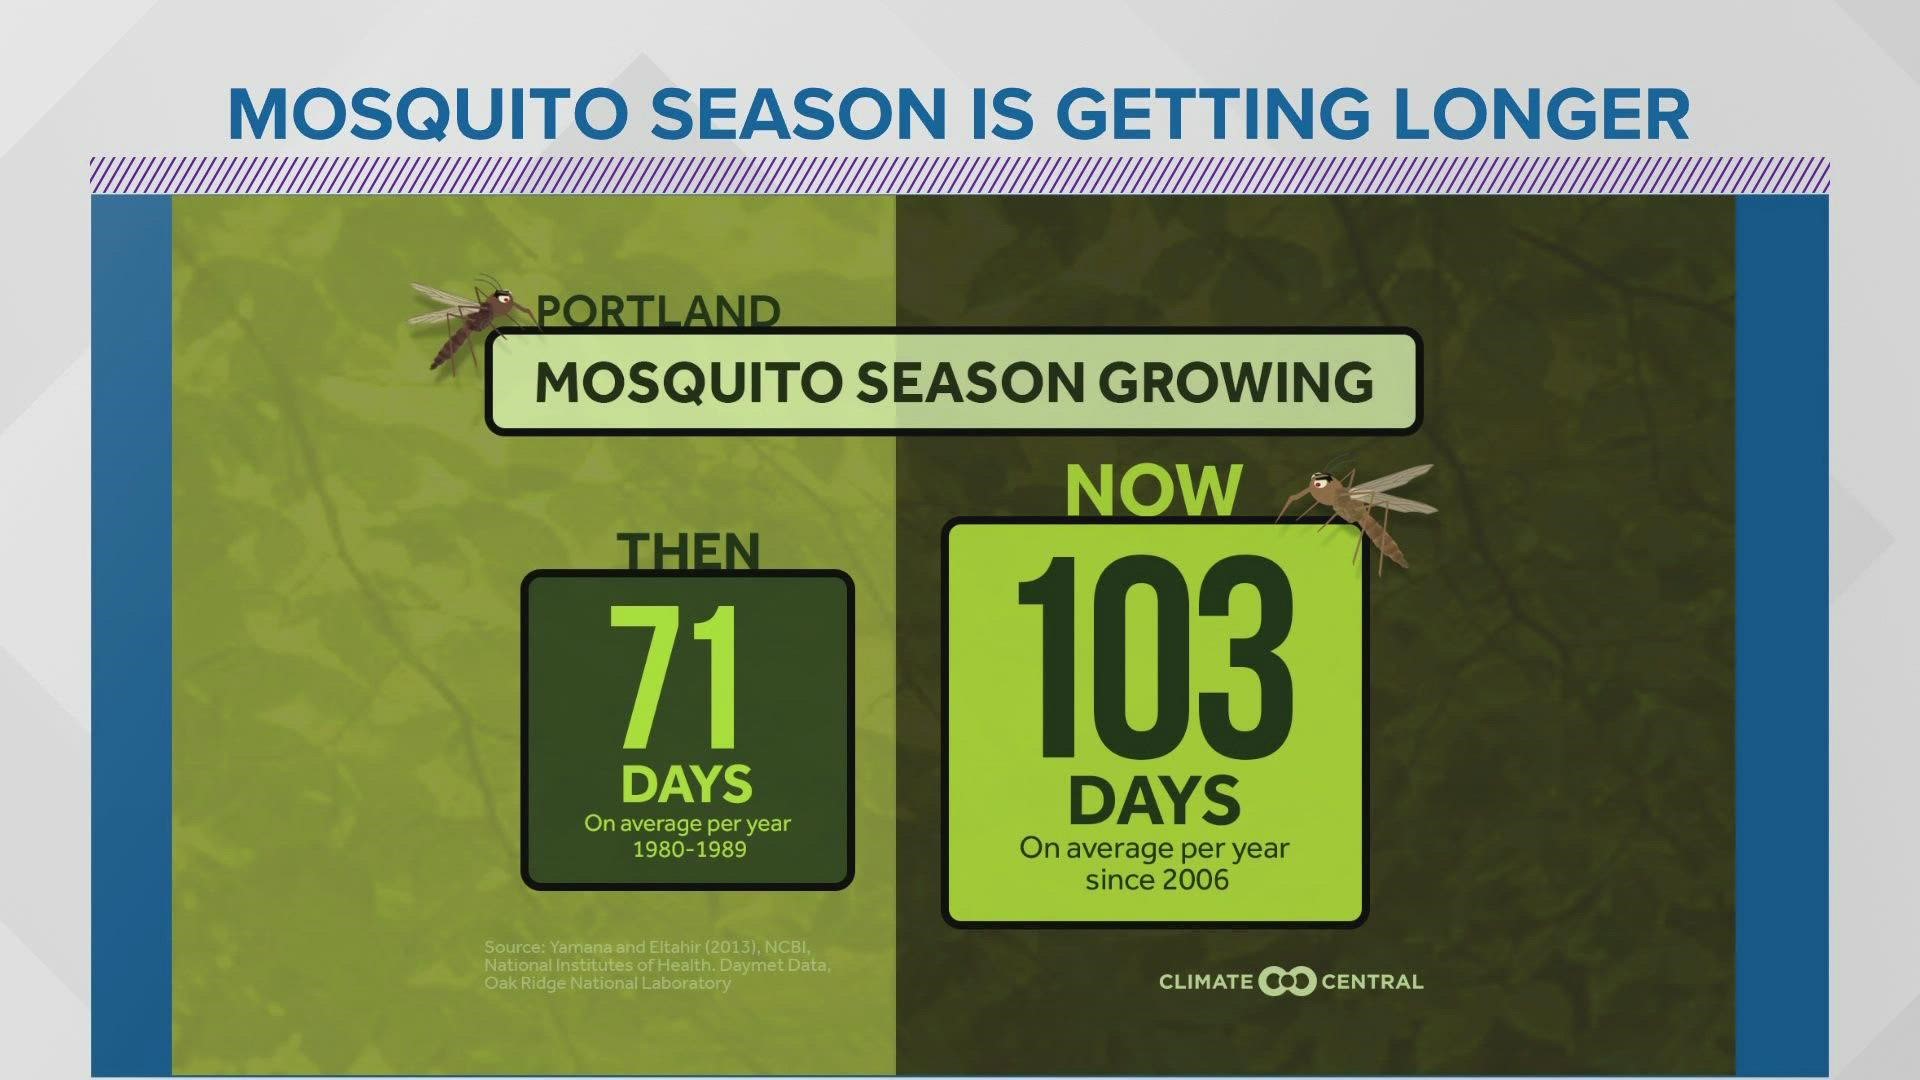 There is a relationship between Maine's warming summers and increased mosquito activity.